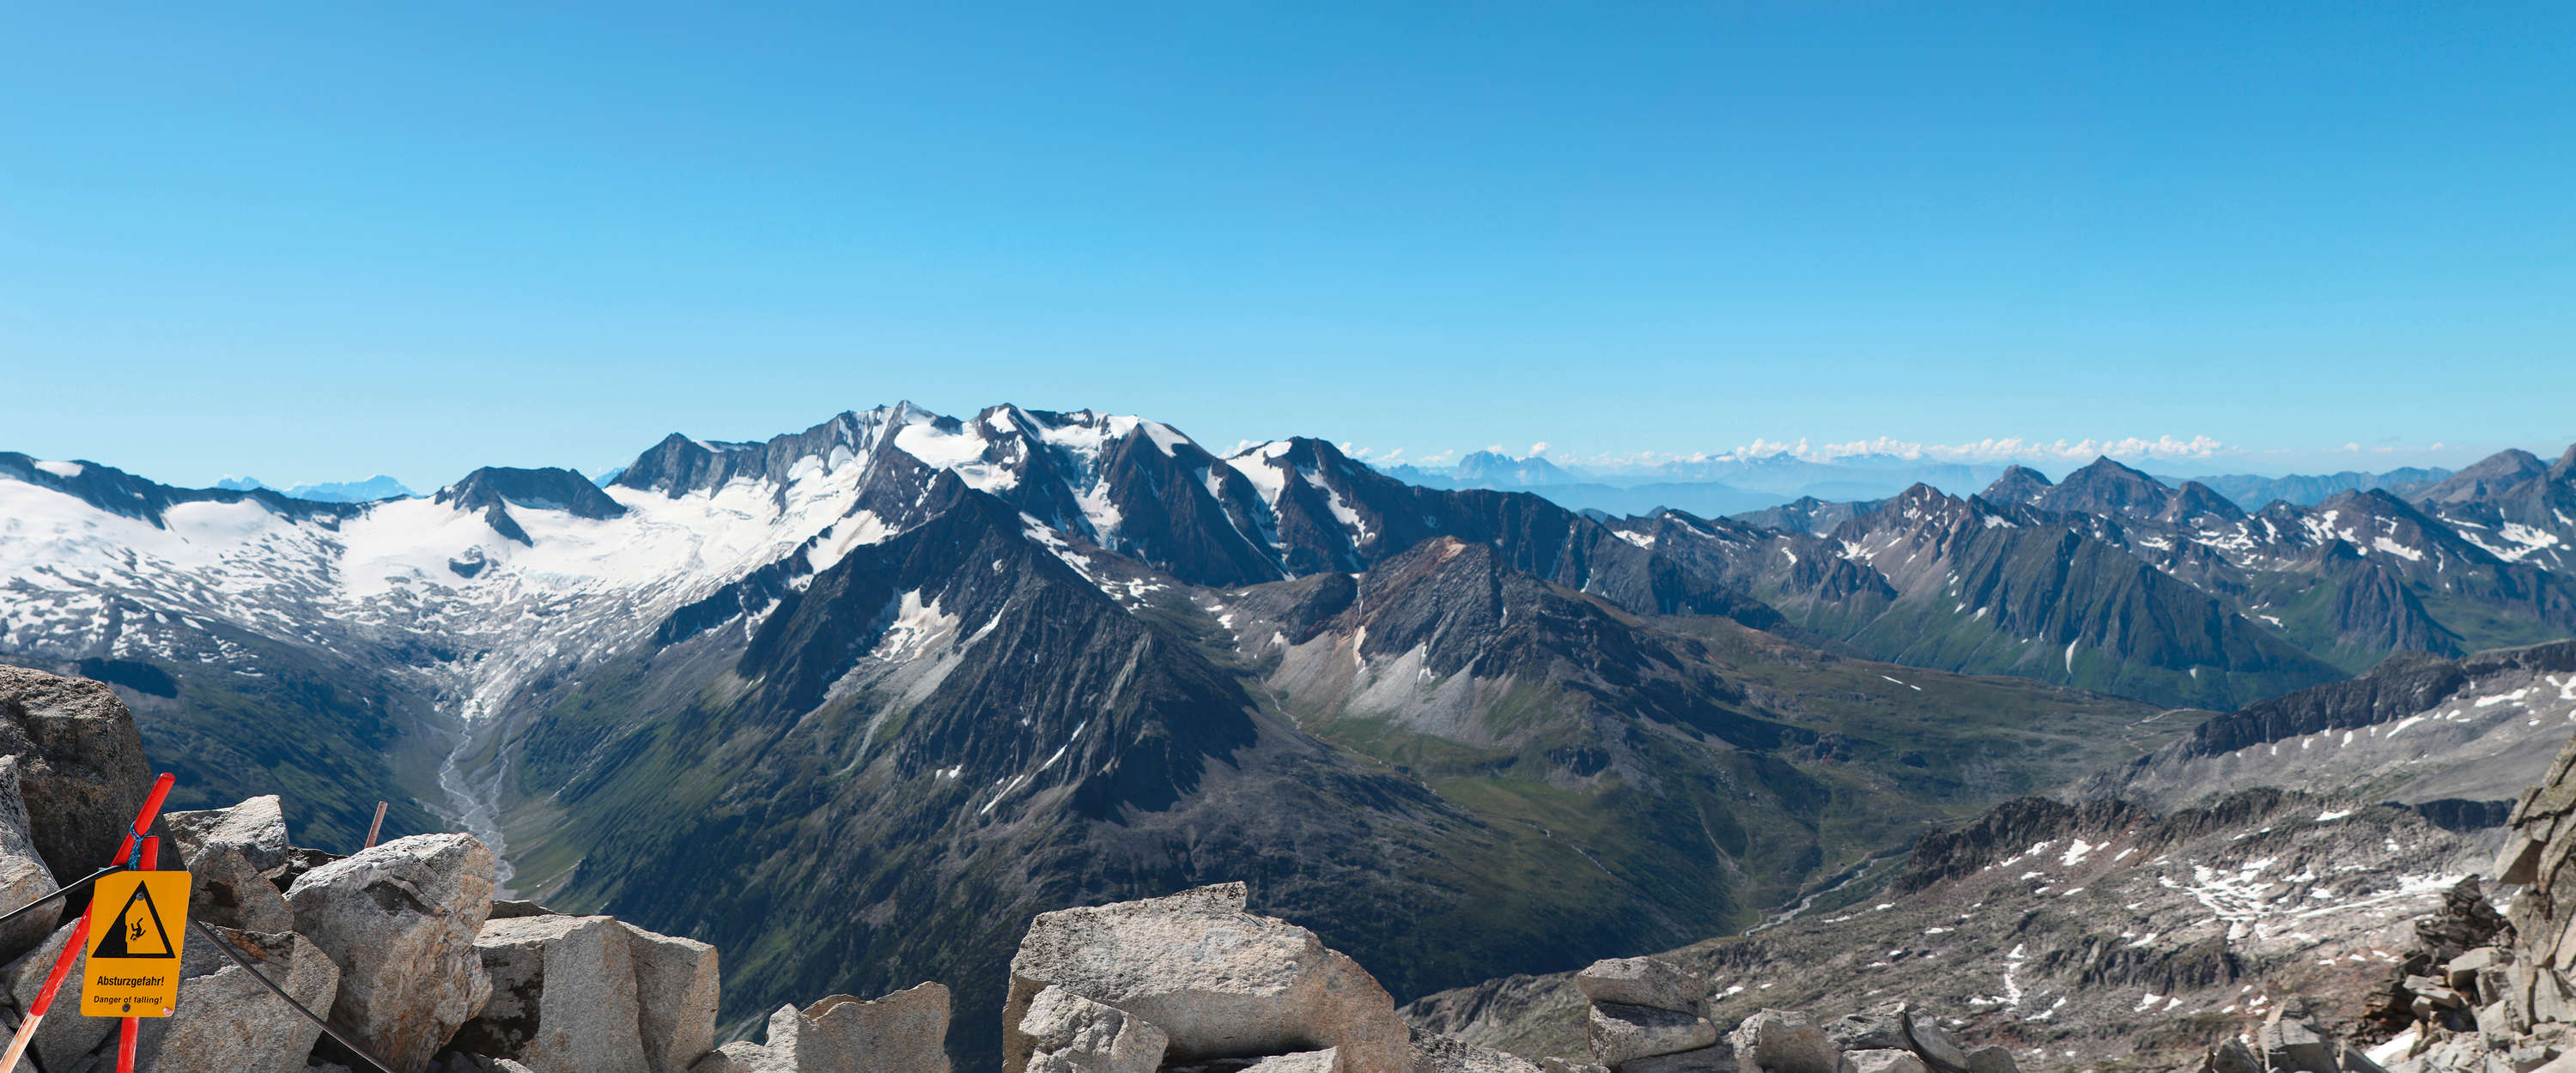             Photo wallpaper with wide view of the alpine panorama
        